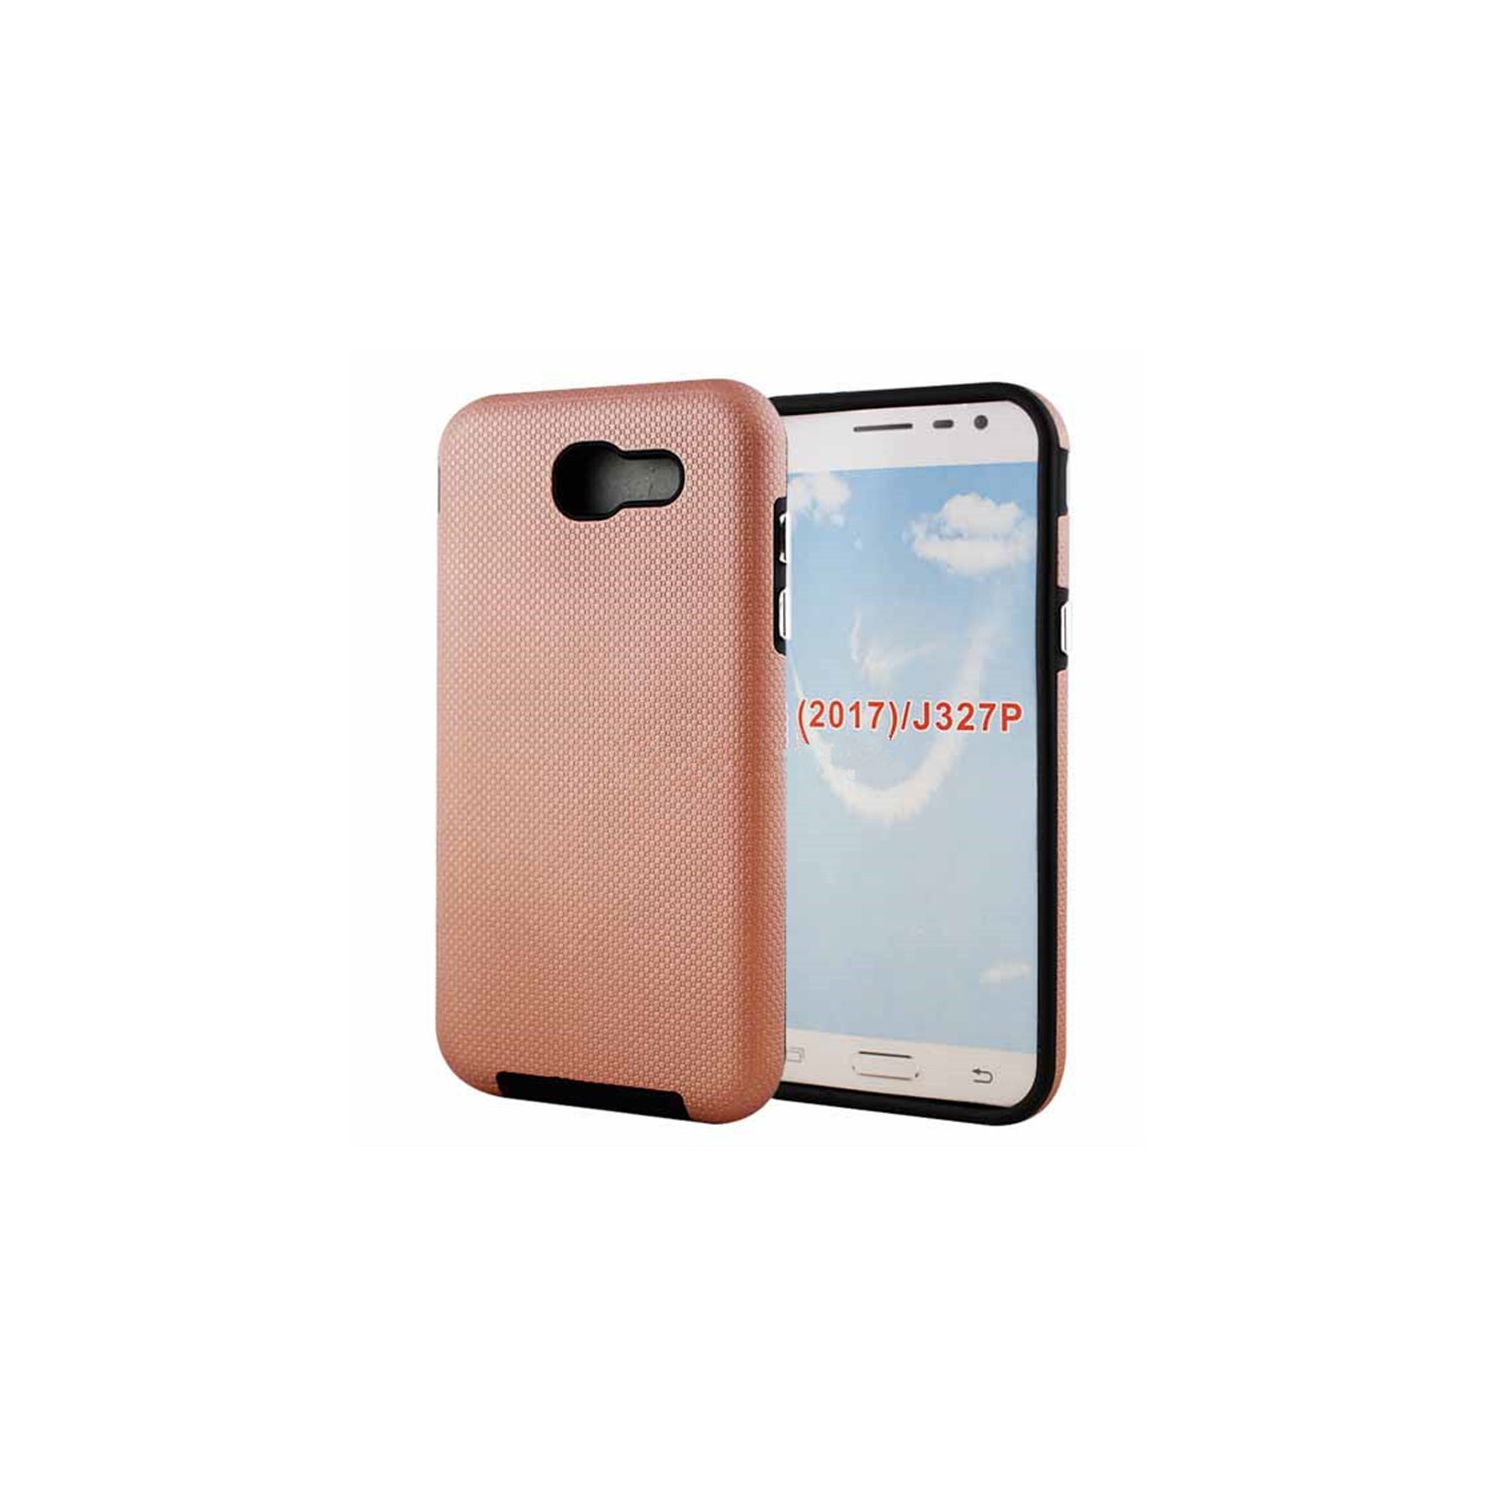 【CSmart】 Slim Fitted Hybrid Hard PC Shell Shockproof Scratch Resistant Case Cover for Samsung Galaxy J3 Prime 2017, Rose Gold